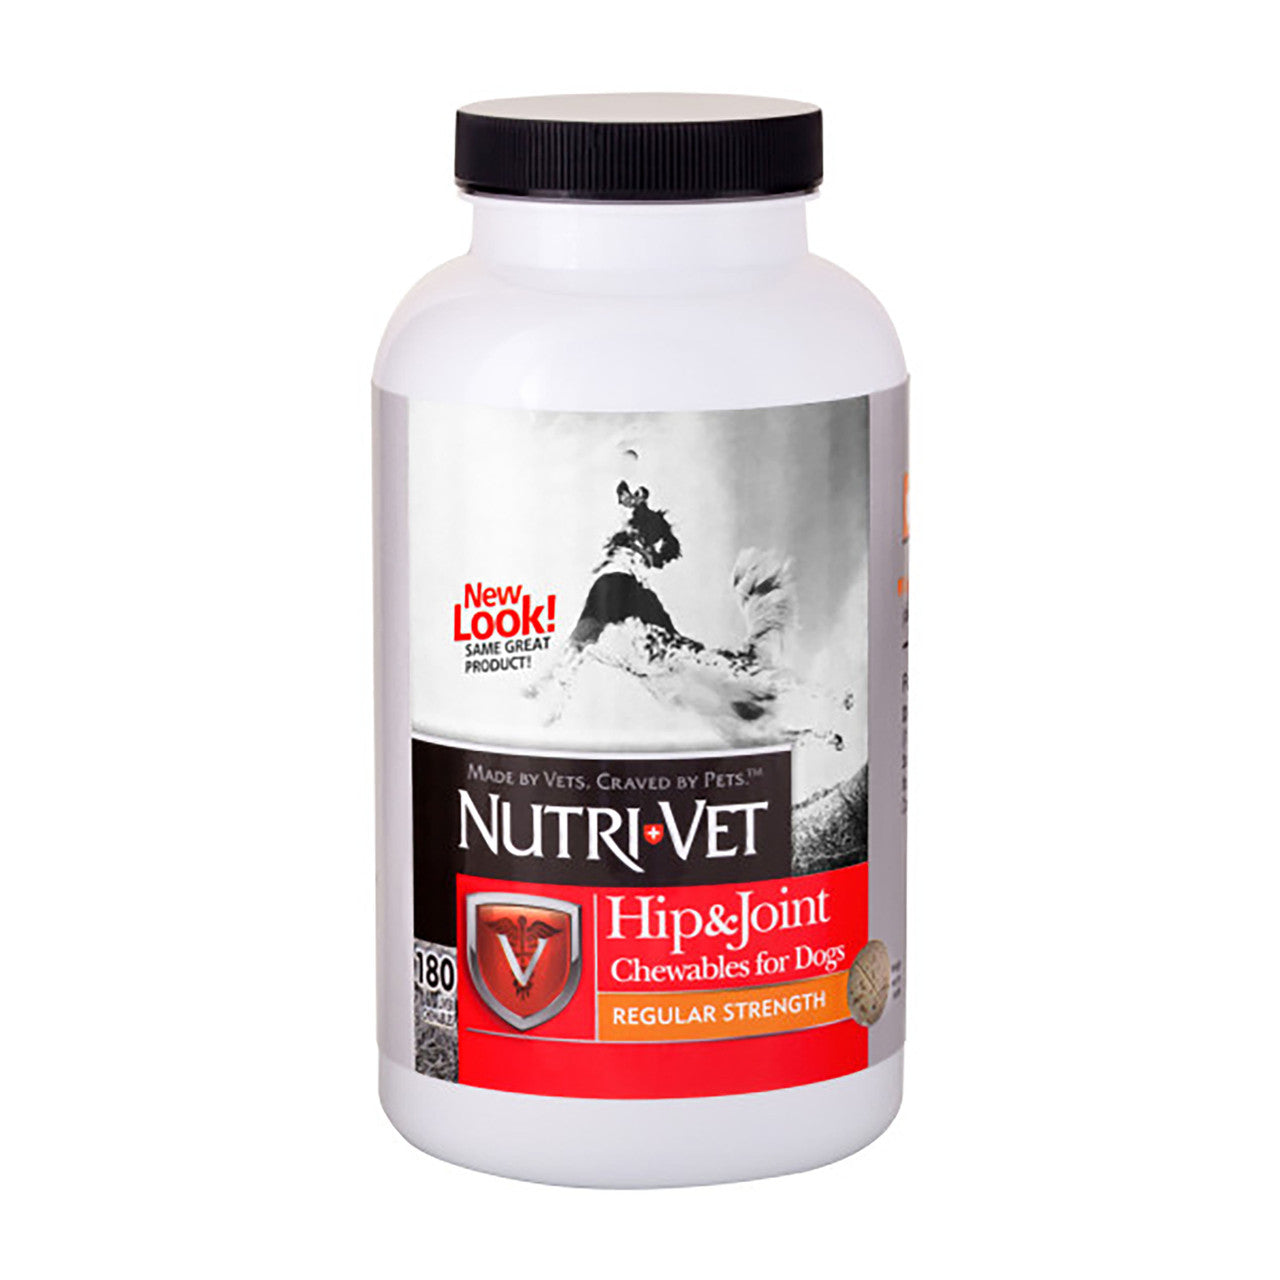 Nutri-Vet Hip & Joint Early Care Liver Chewables 180 Count